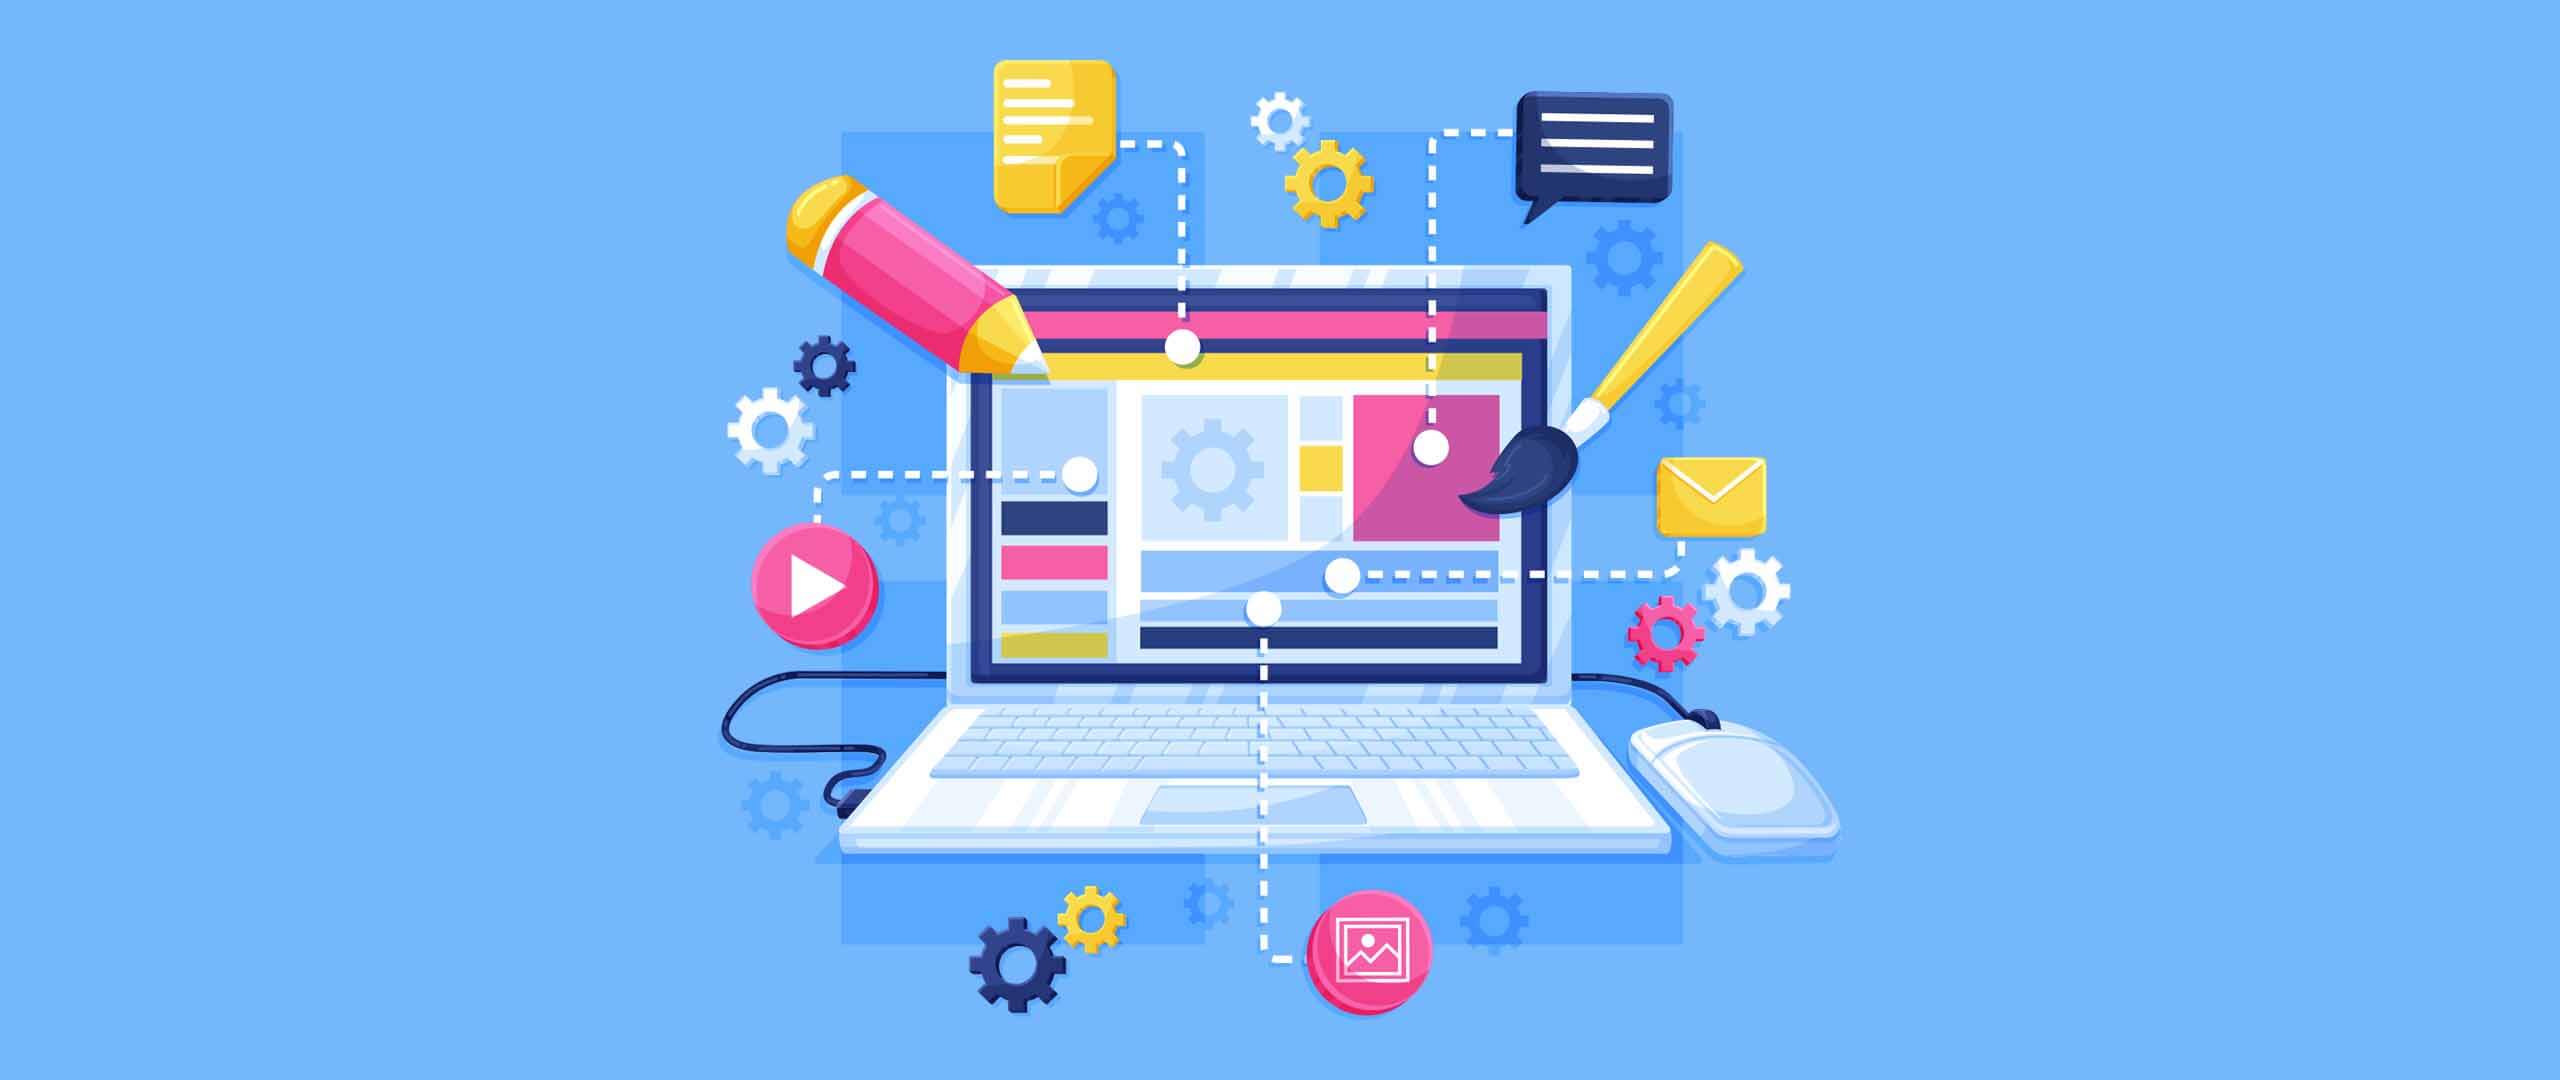 Top 3 Web Design Trends in 2021 You Need To Know